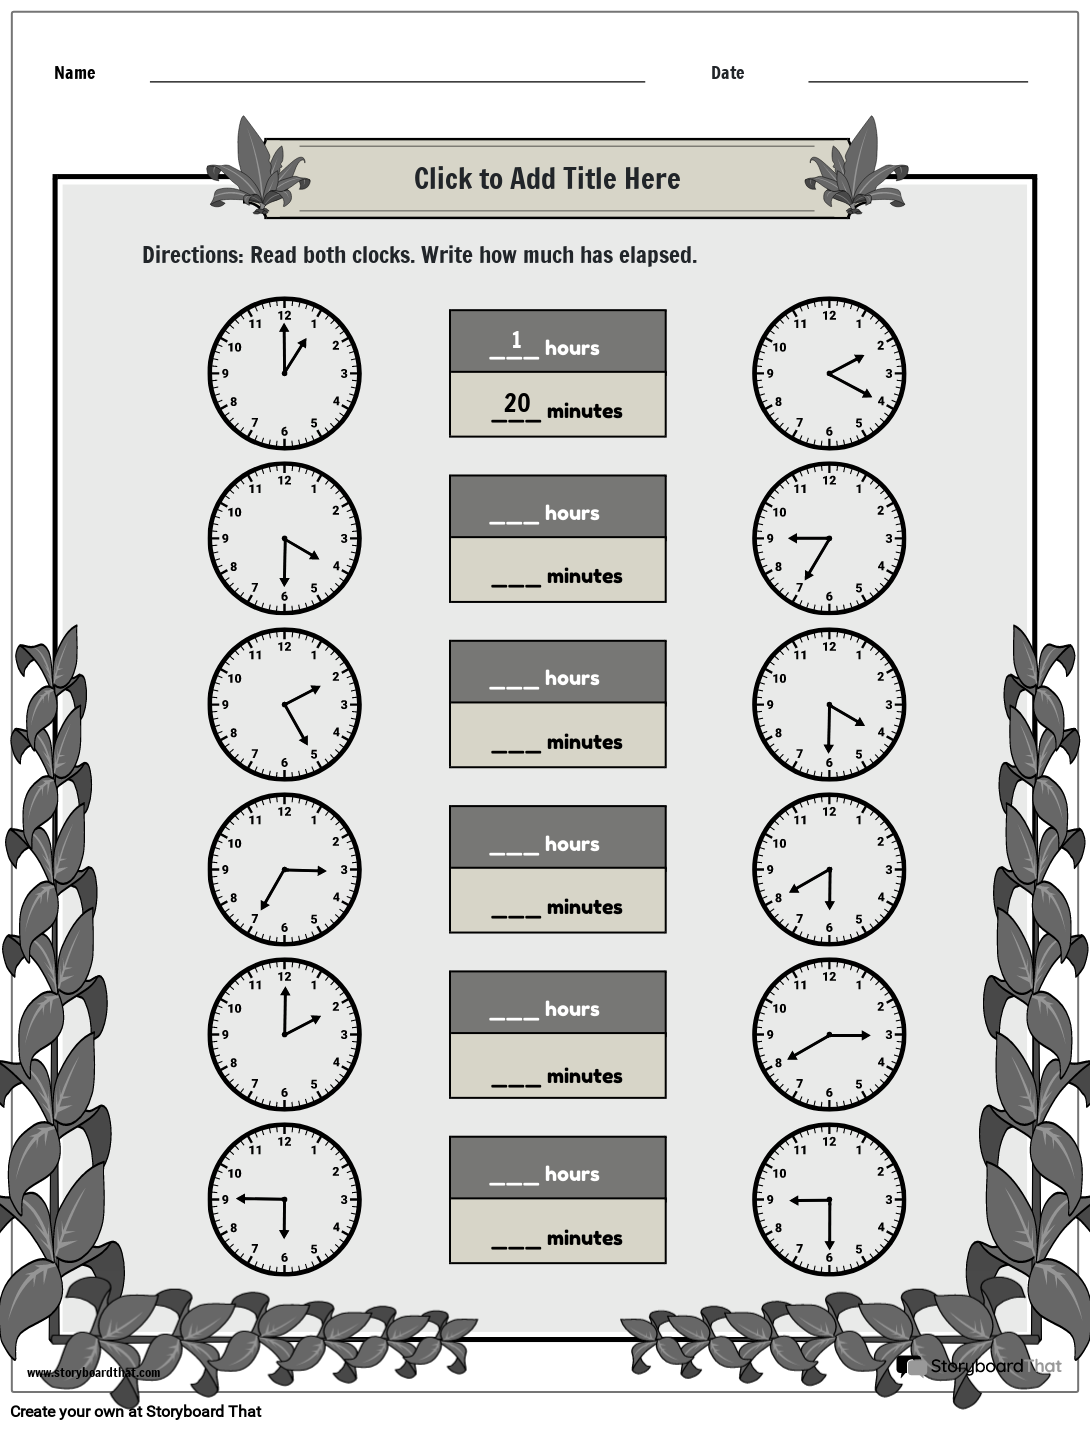 PLANT THEMED - ELAPSED TIME WORKSHEETS - EARLIER AND LATER